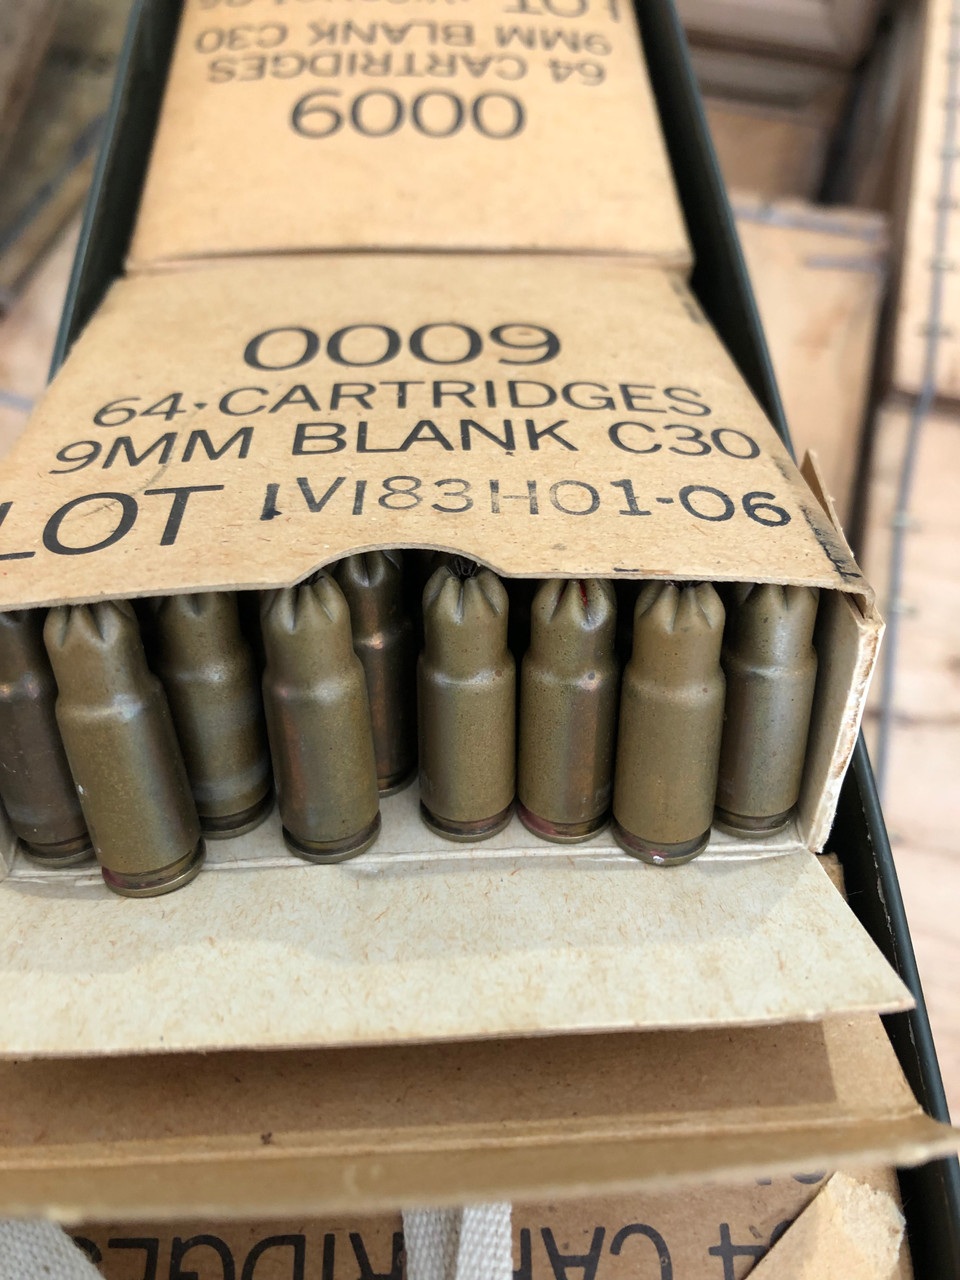 9mm (Blank Ammo) IVI Canadian Military - Steel Can of 960rds